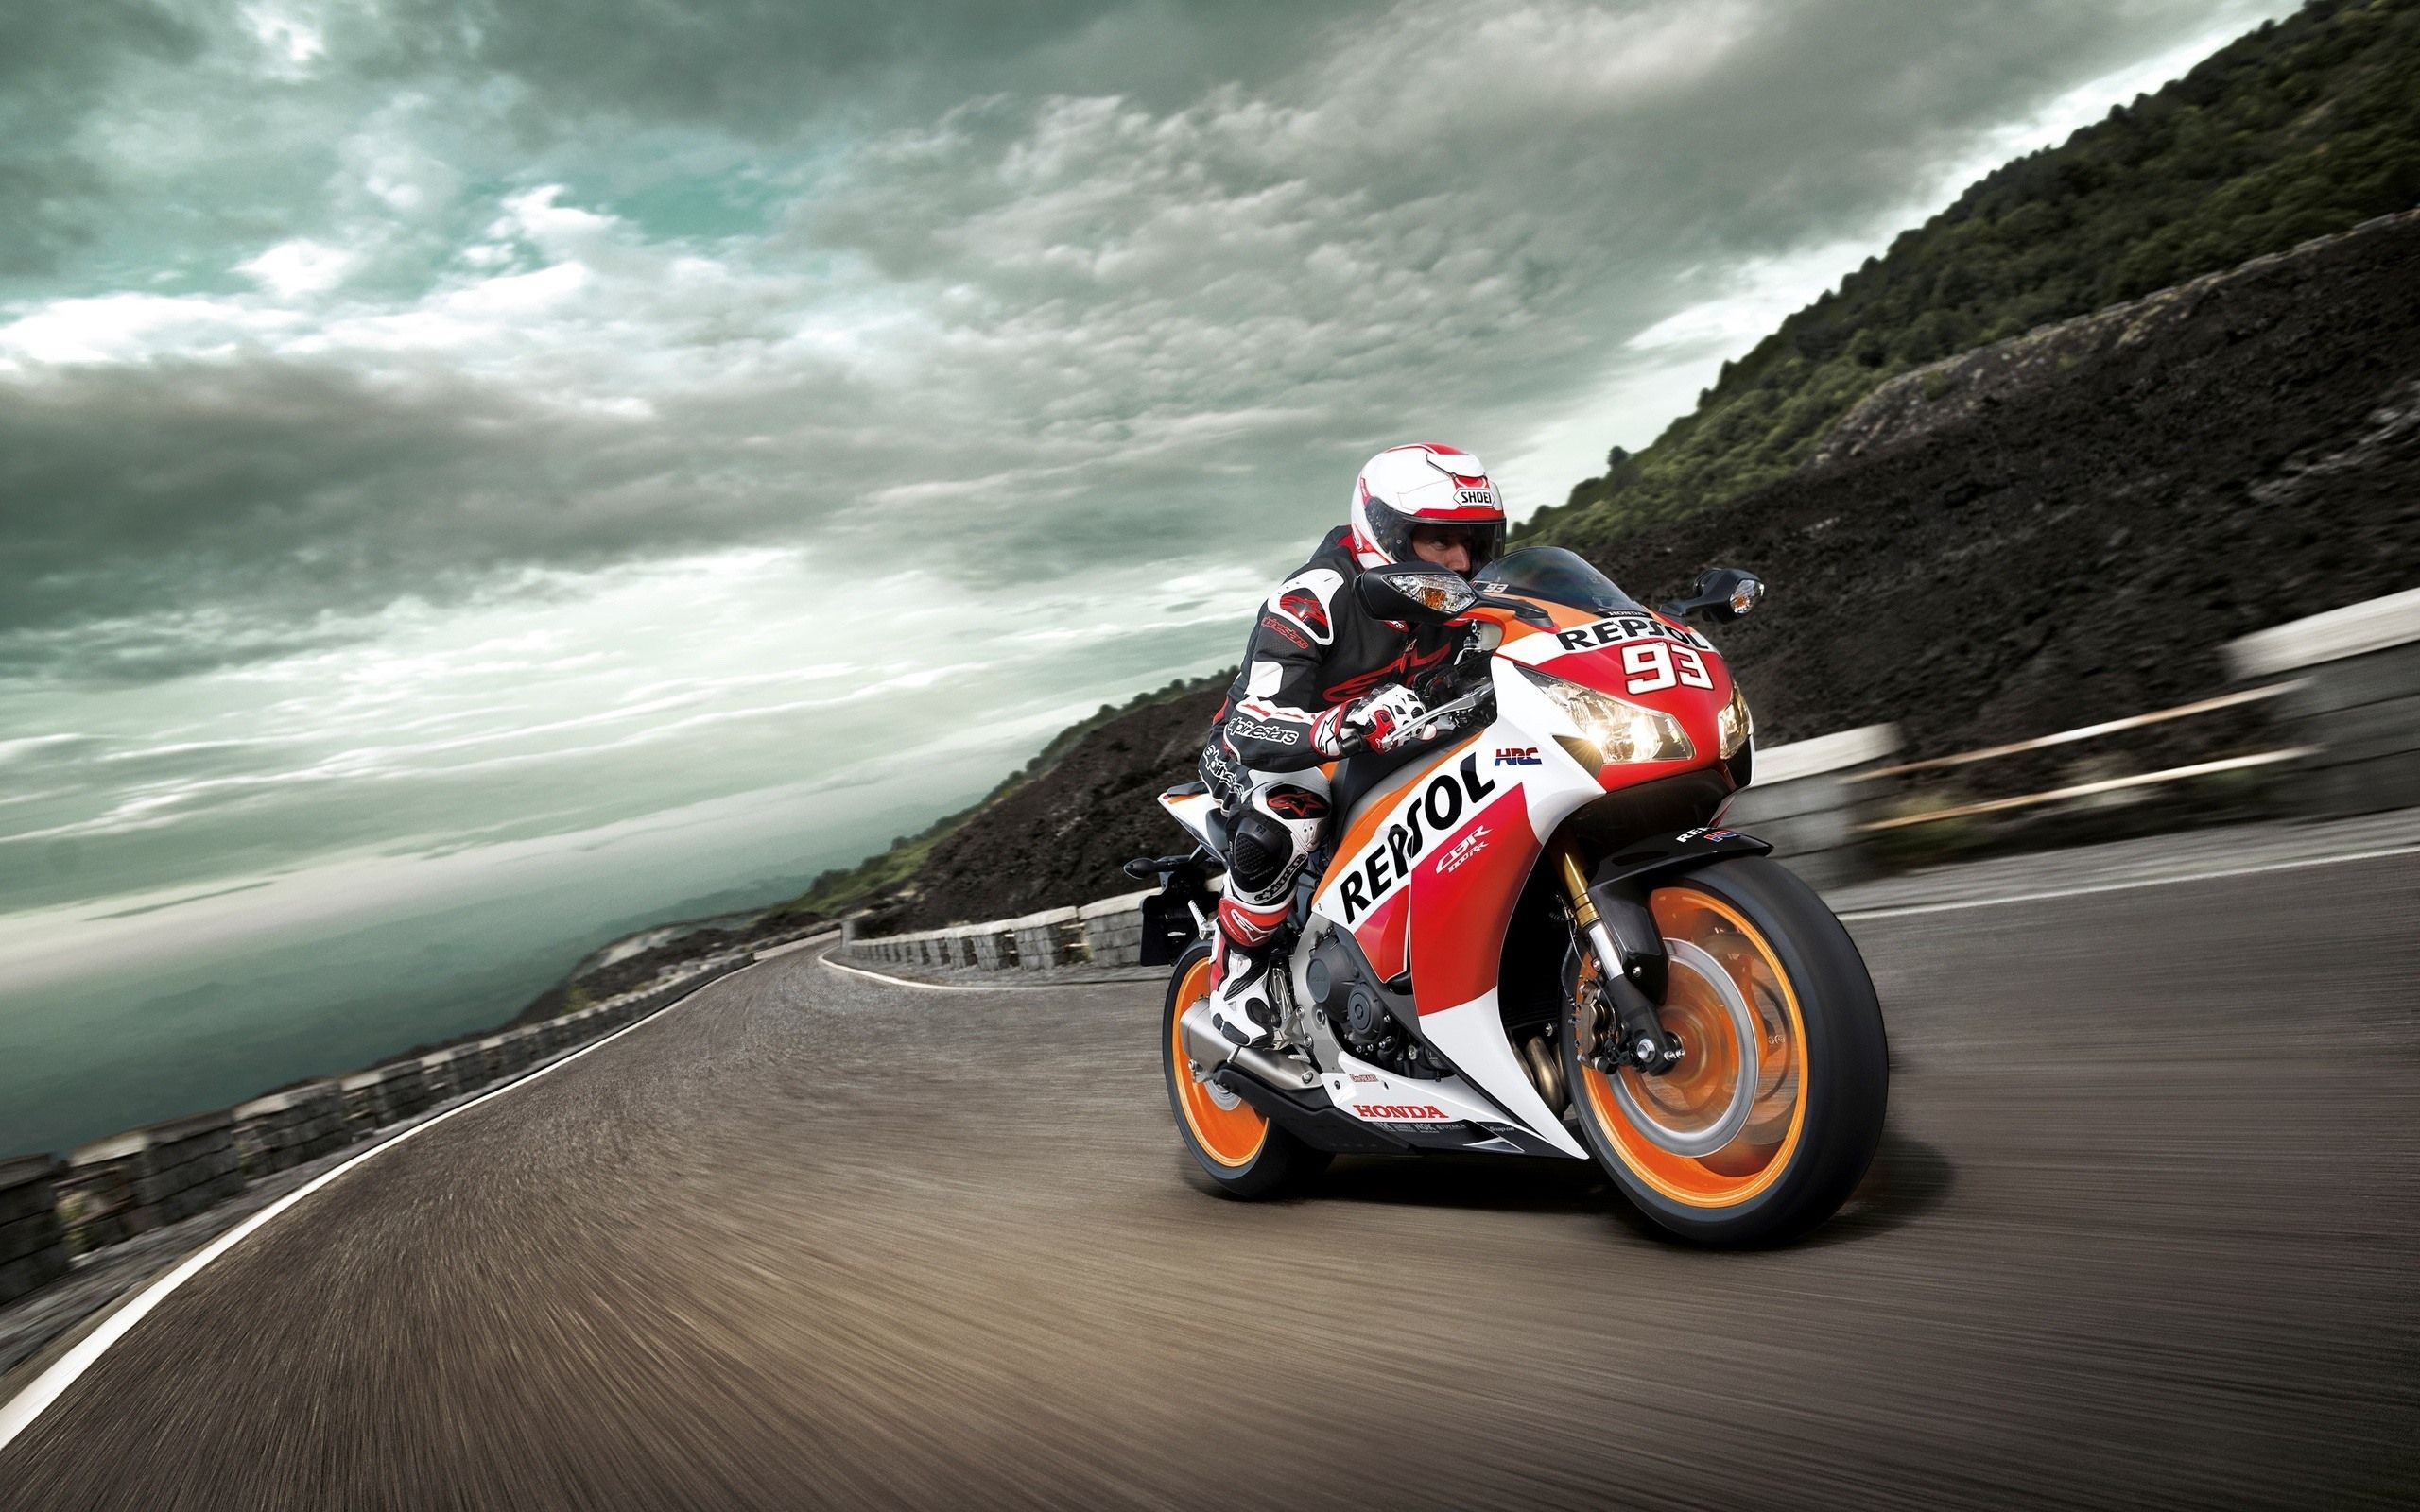 Wallpaper Honda CBR1000RR motorcycle, speed, race 2560x1600 HD Picture, Image